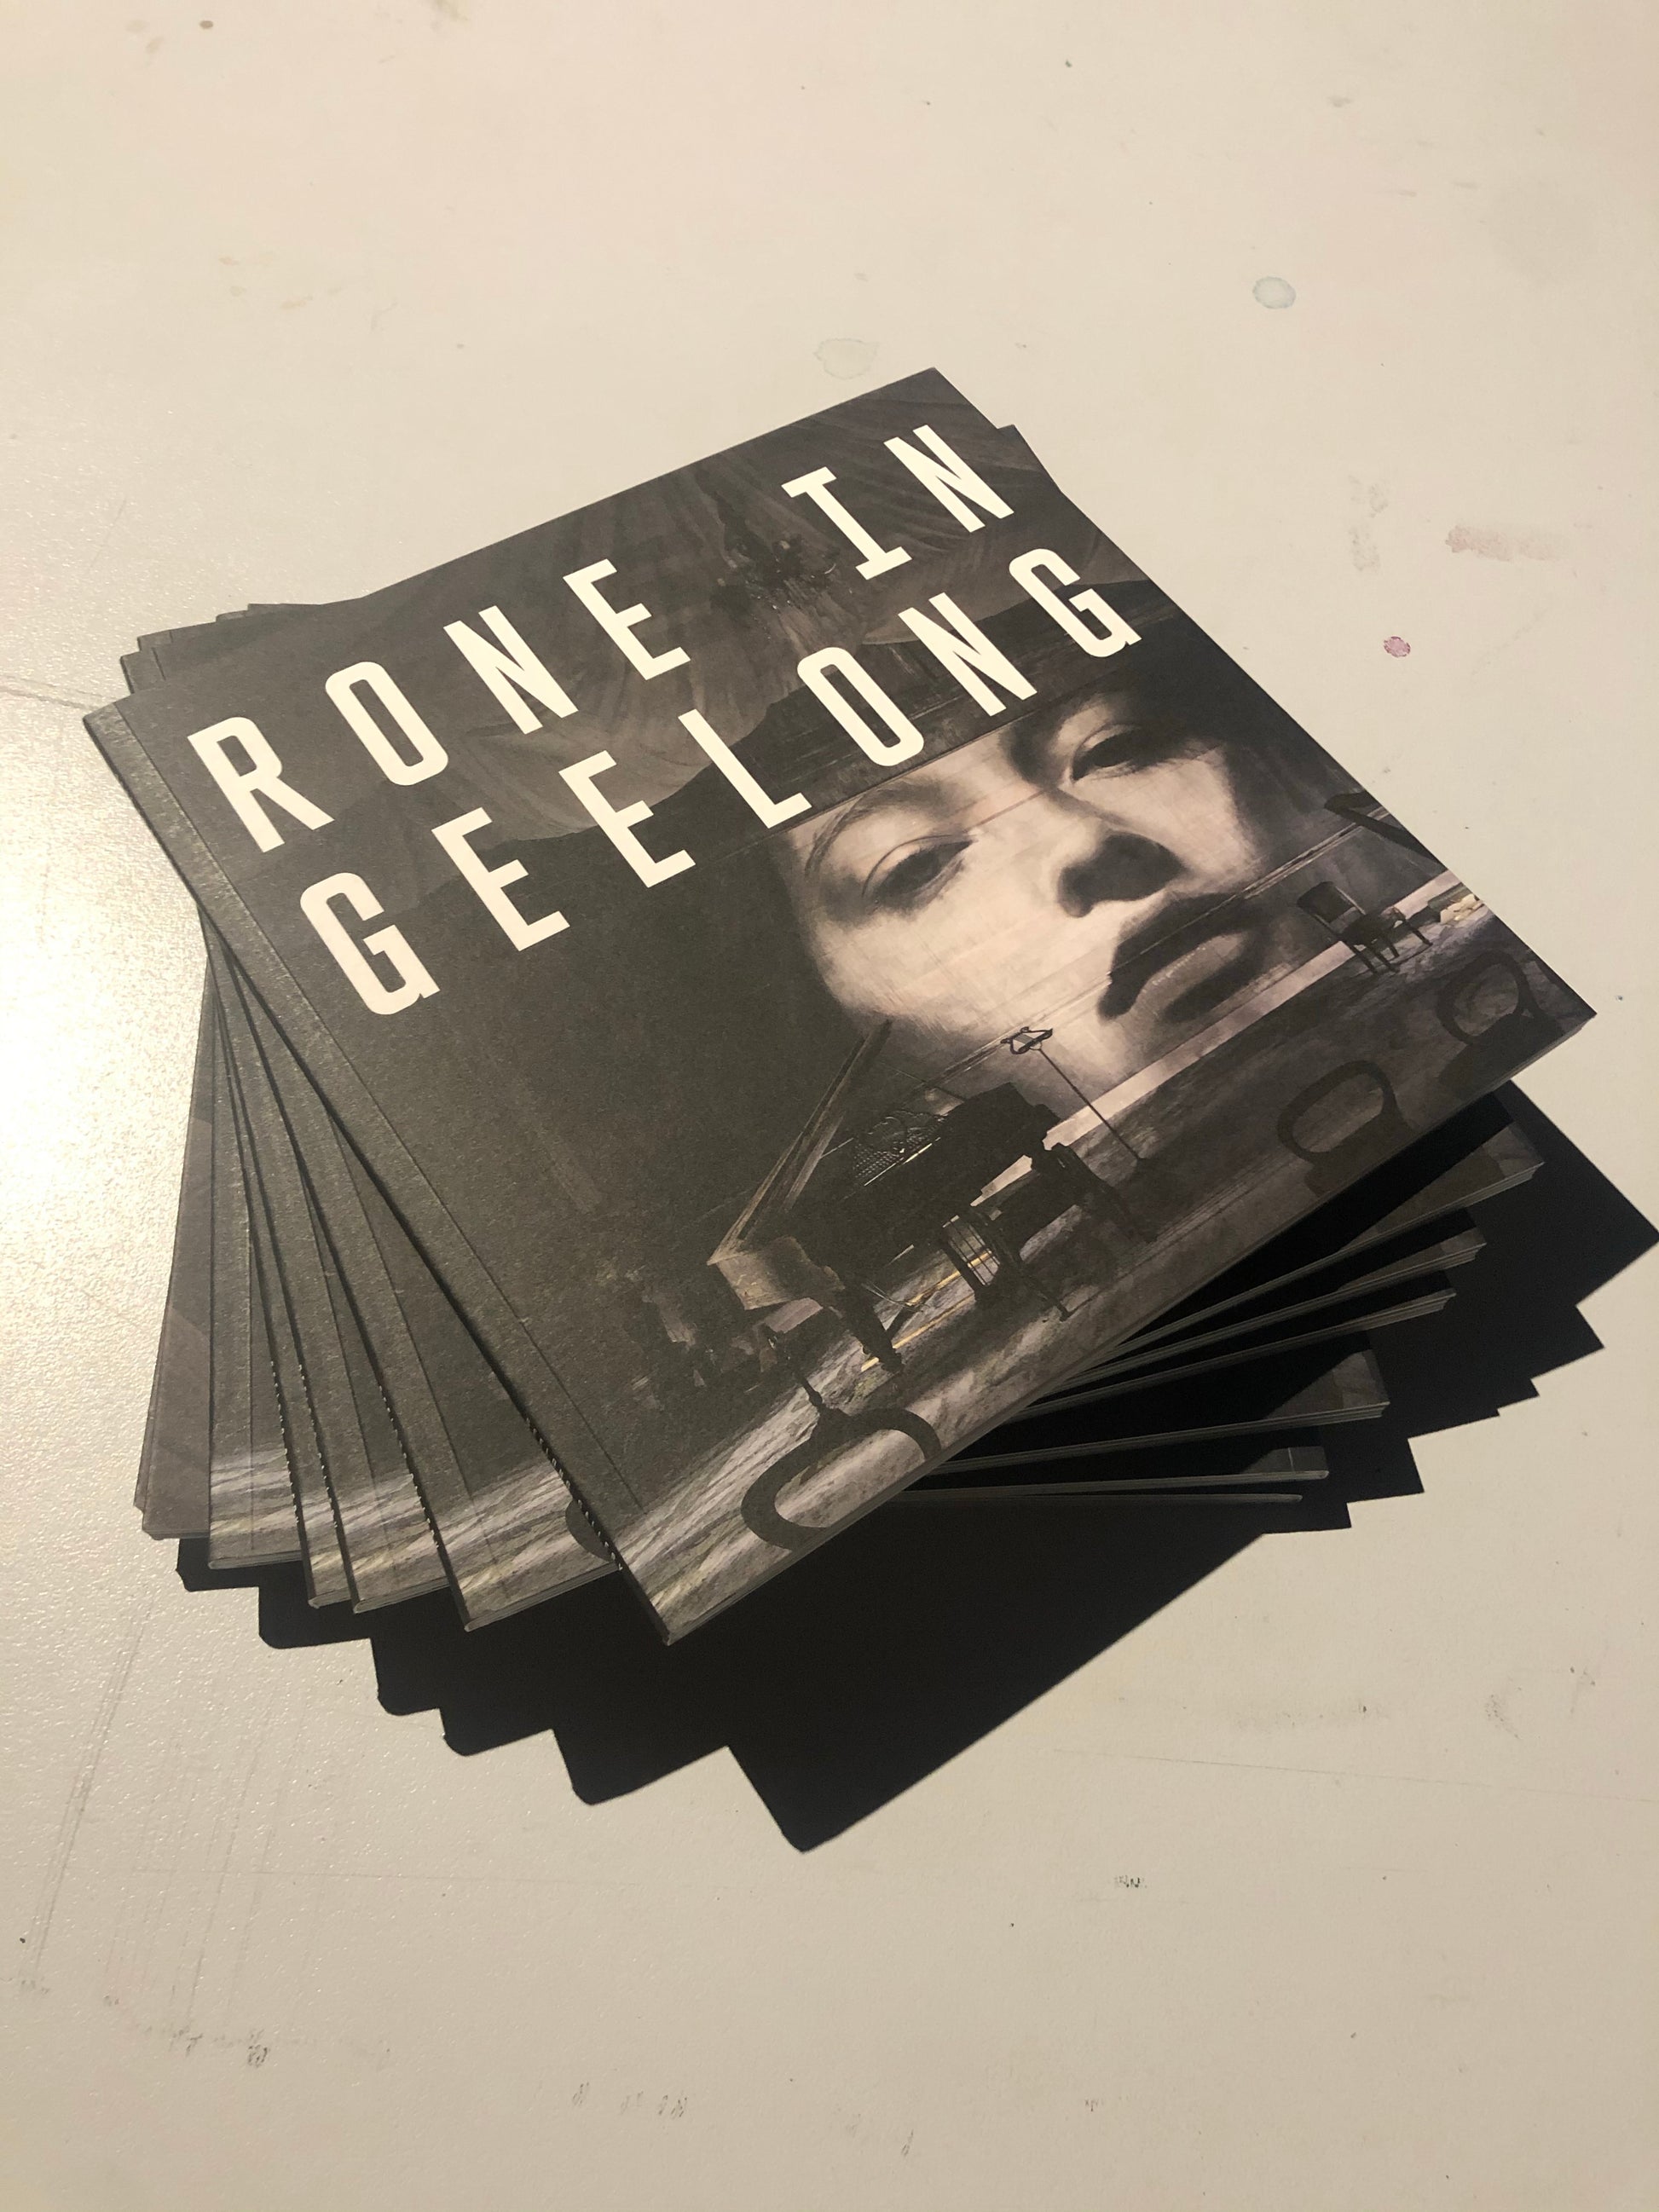 Exclusive Catalogue for Image of a collection of exclusive catalogues from the Rone In Geelong Exhibition by Australian Street Artist Rone. 